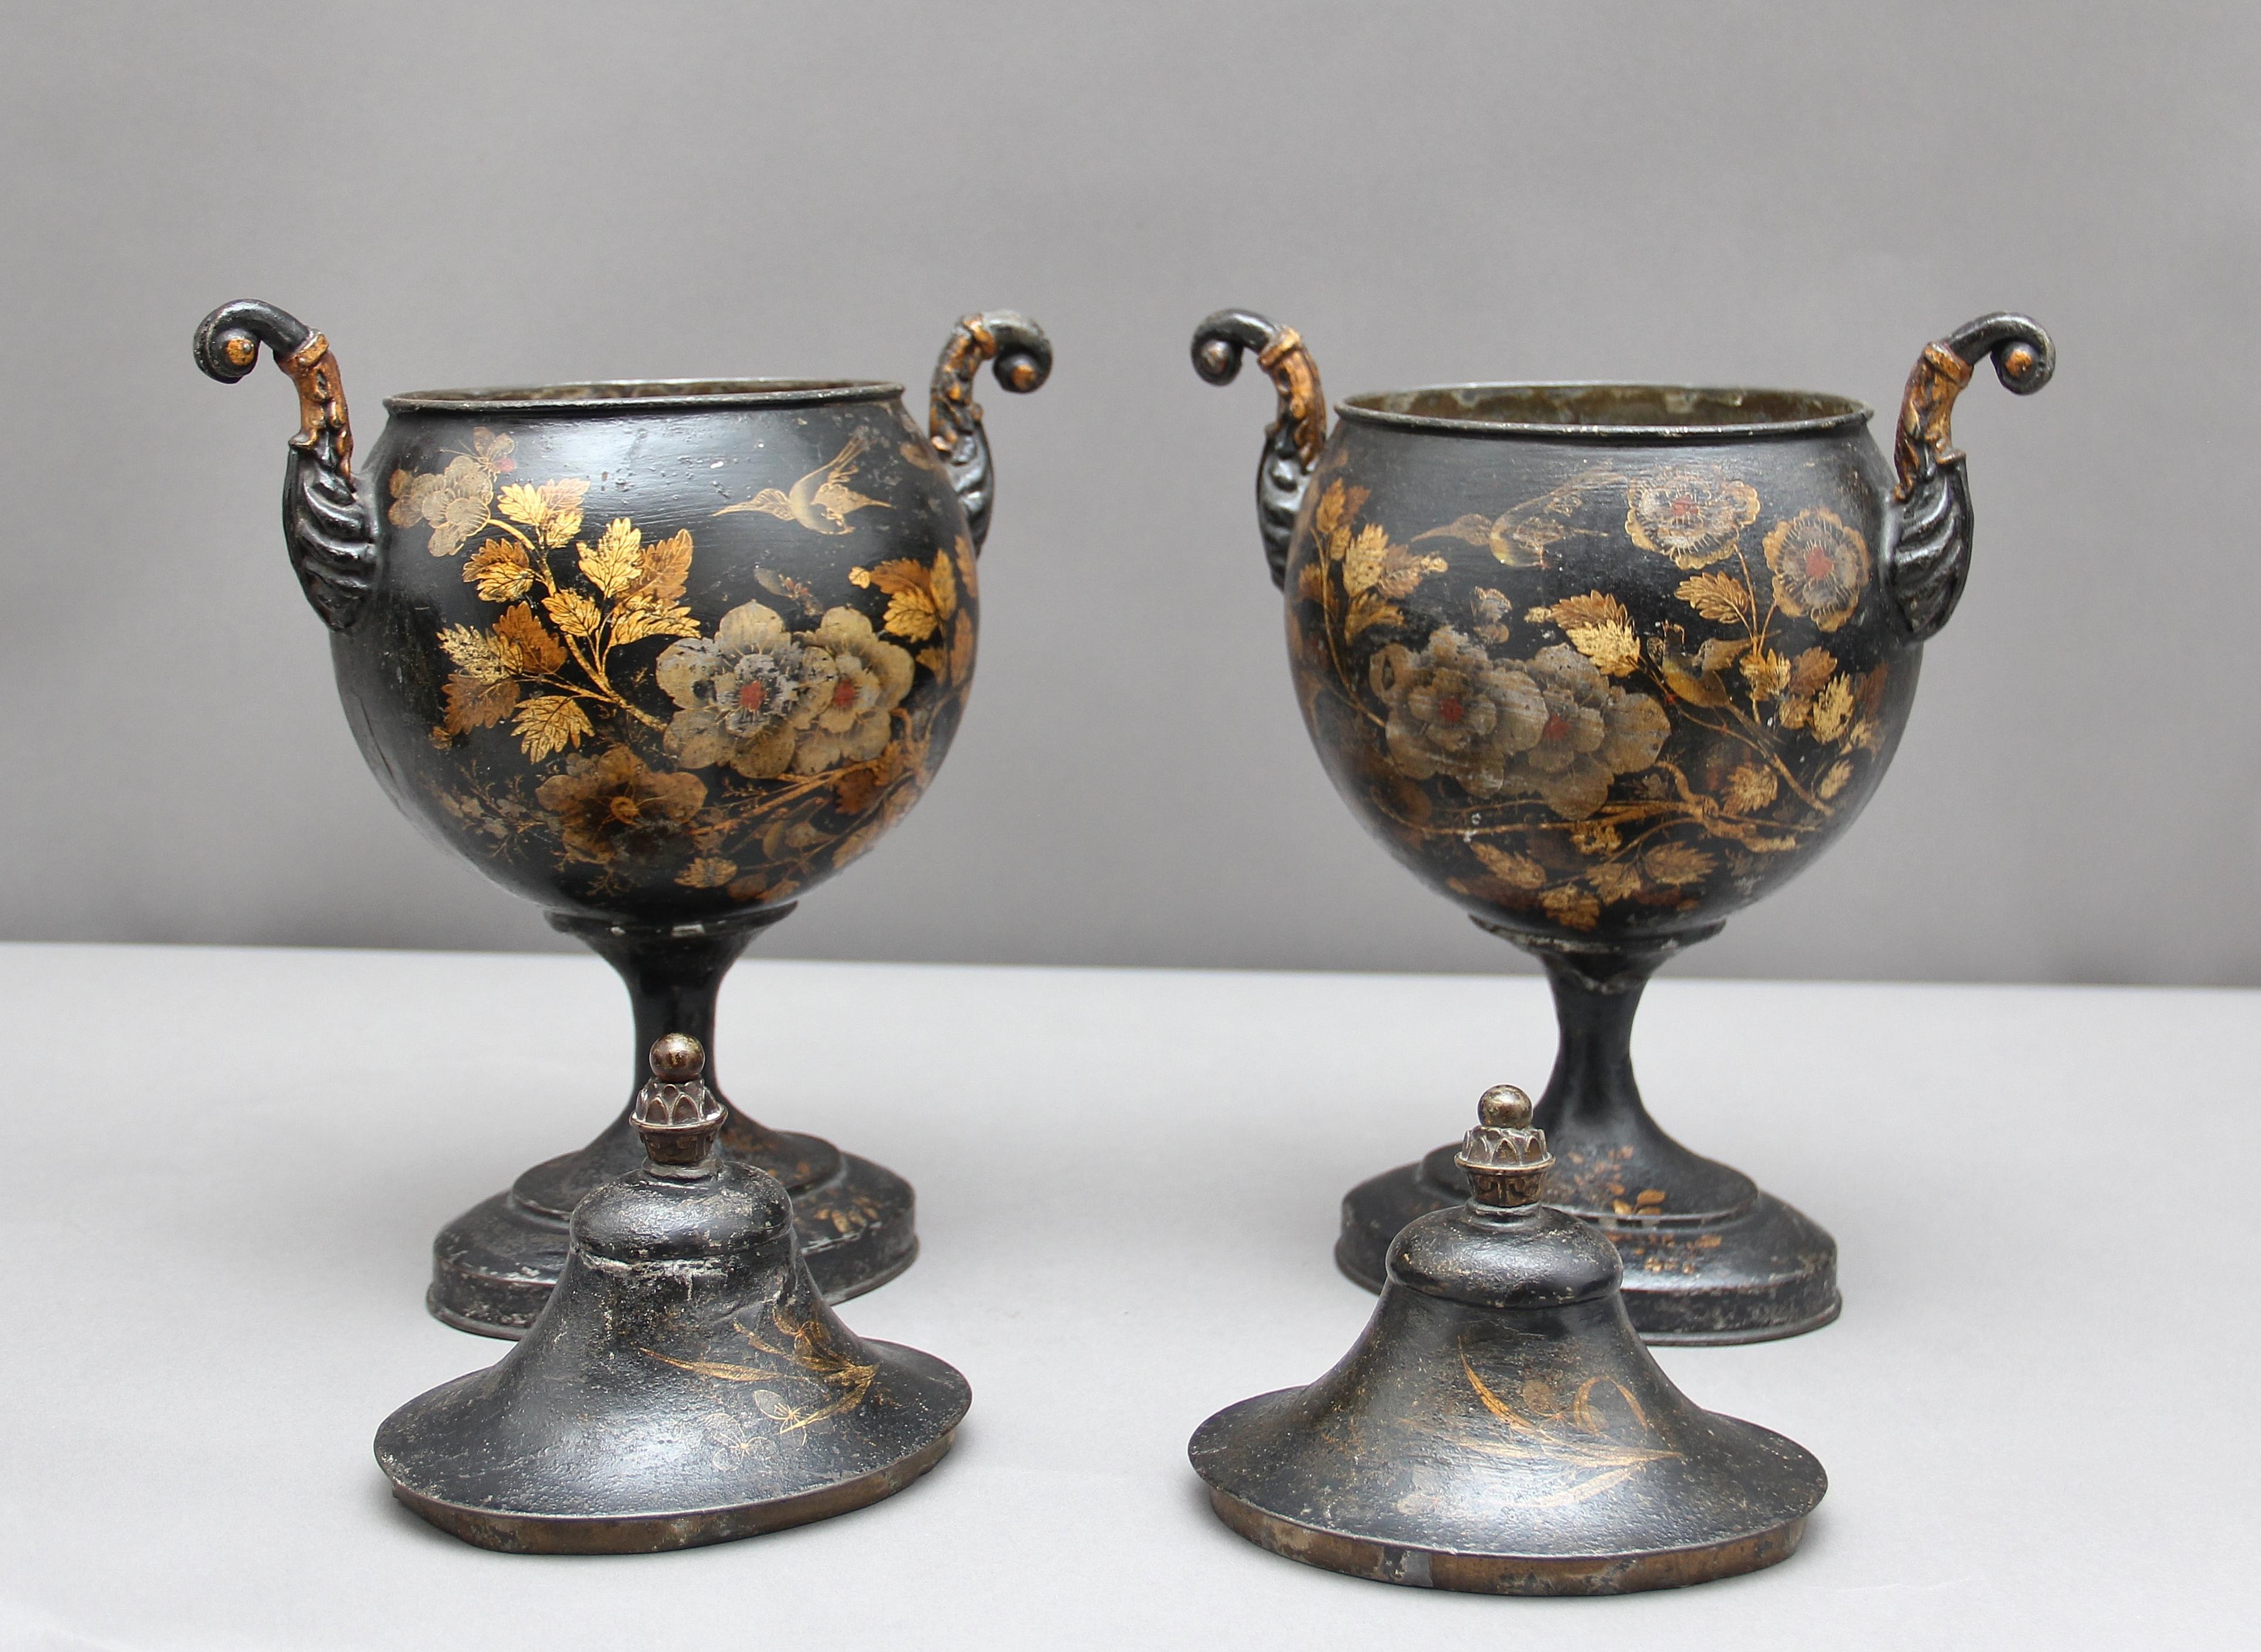 Regency Pair of Early 19th Century Tole Chestnut Urns